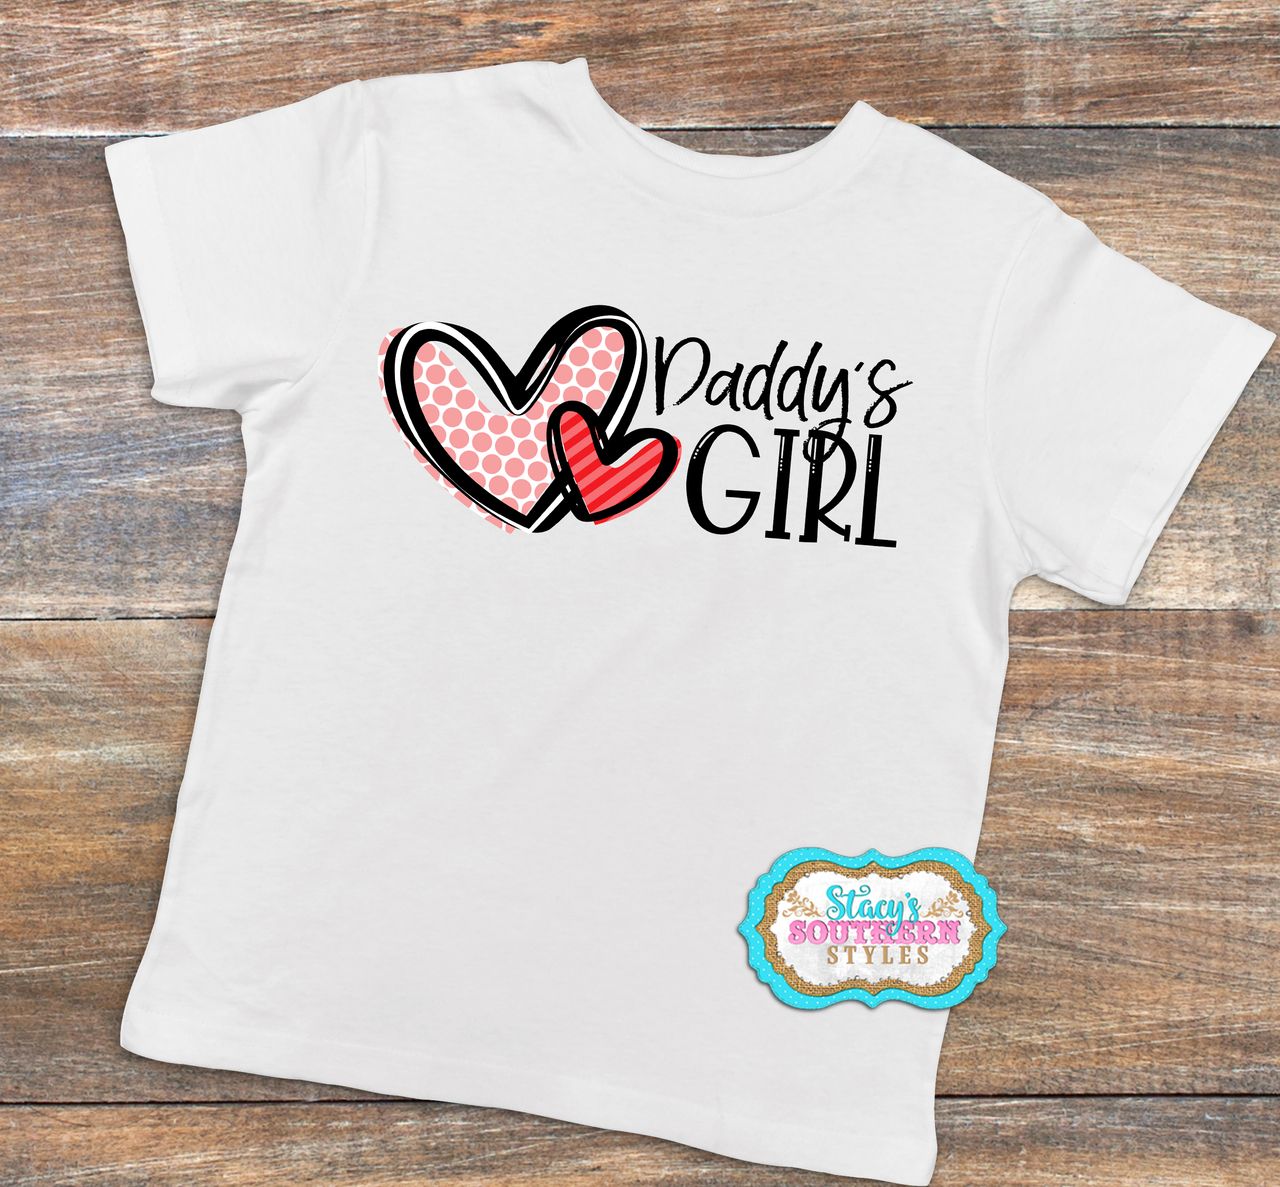 Daddy's Girl tee - Stacy's Southern Styles